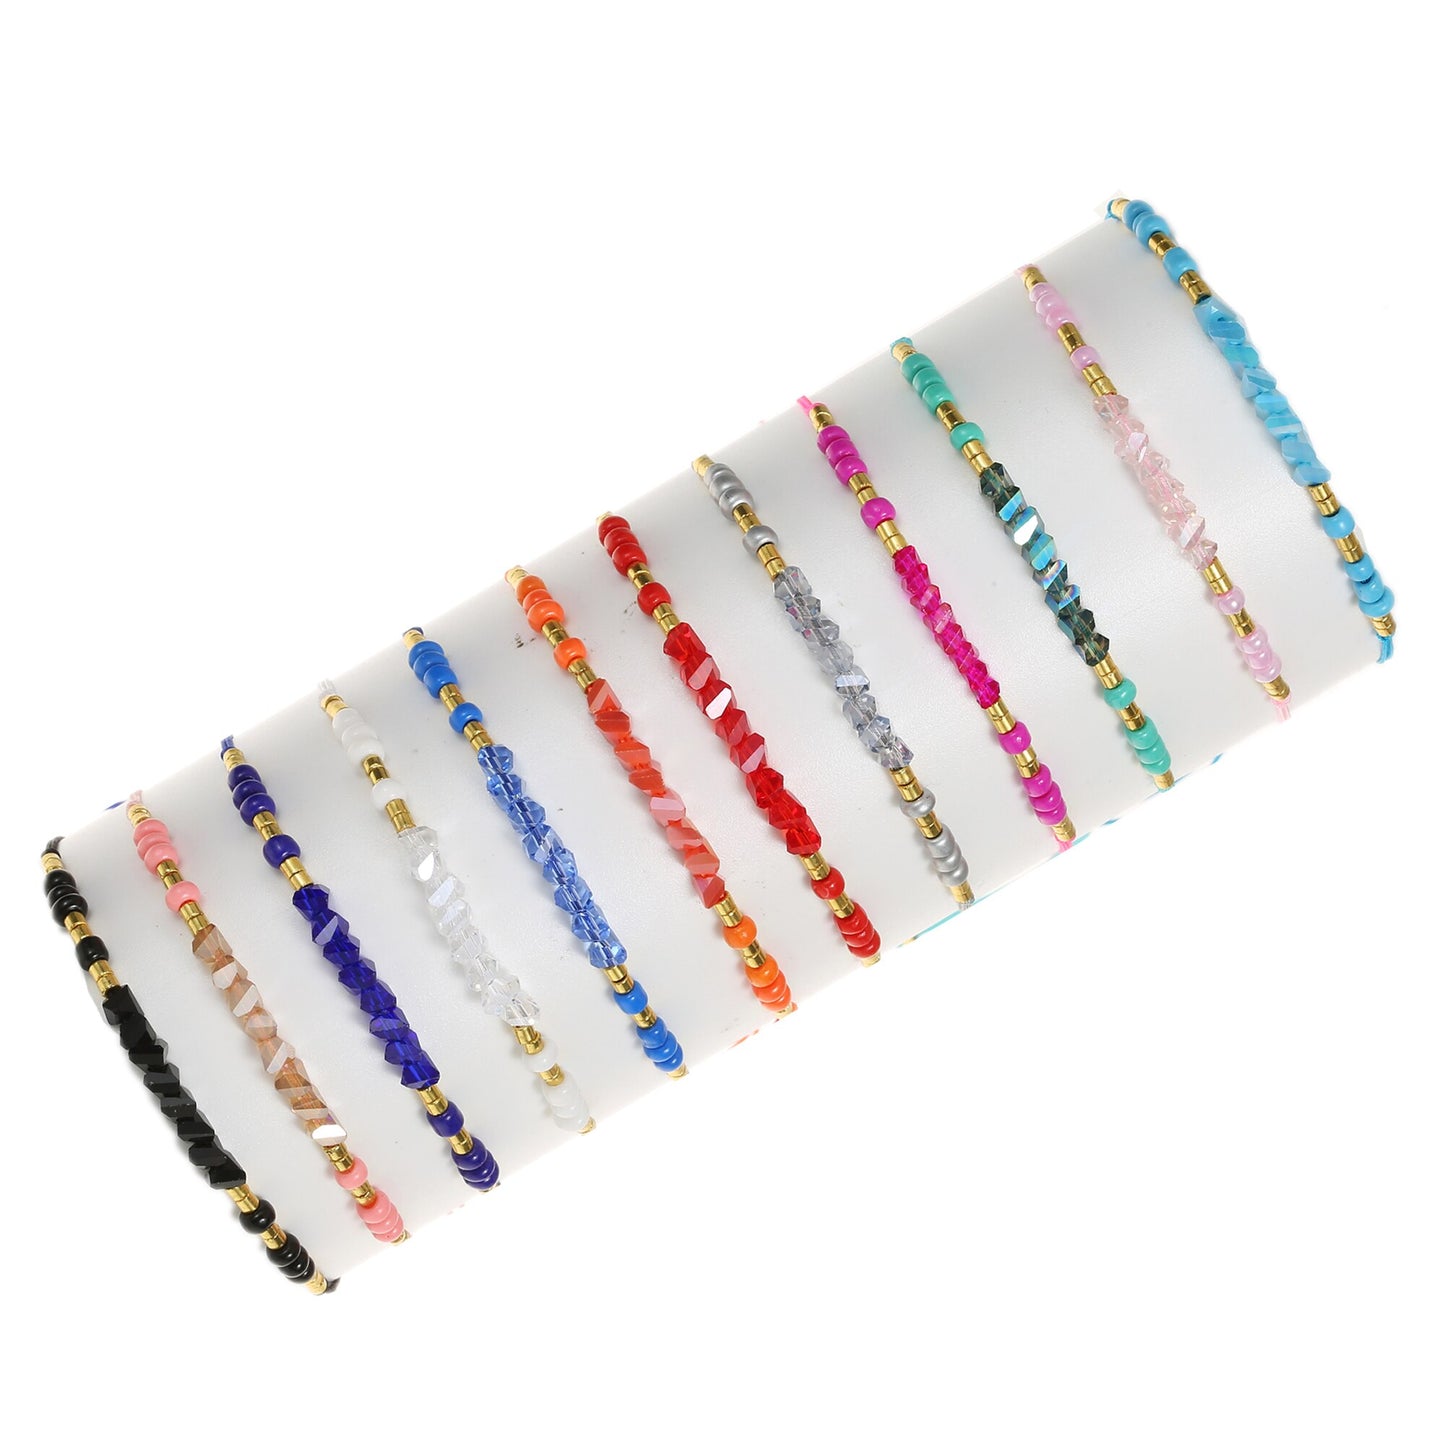 12Pcs Seeds Beads Faceted Crystal Braceles Anklets Adjustable Hand Braided Wax Rope Chain Wristband Cuff Jewelry